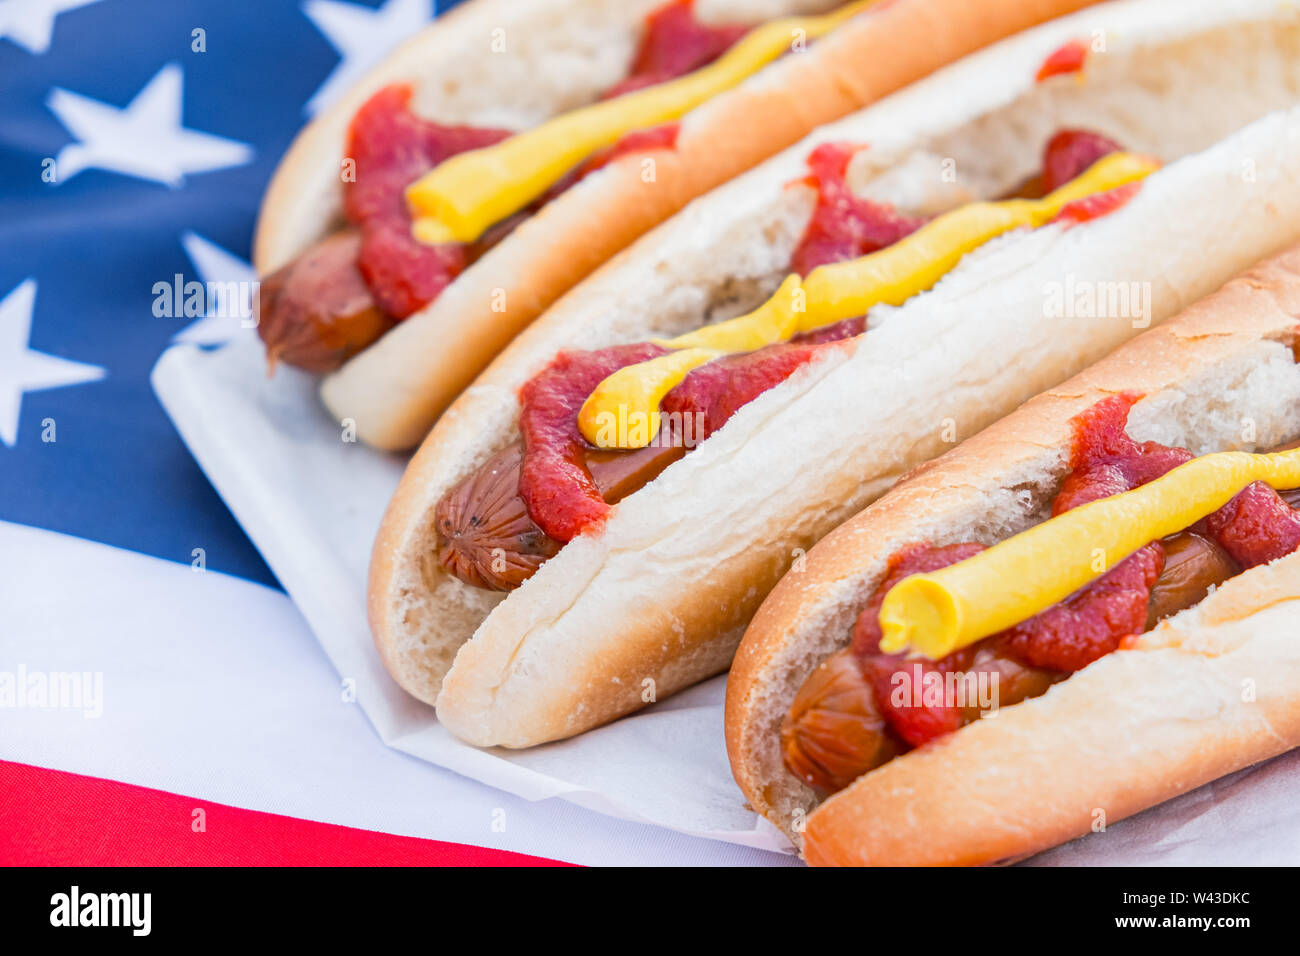 Typical american fastfood: hot dogs and american flag. Close-up view of stereotypical US food Stock Photo